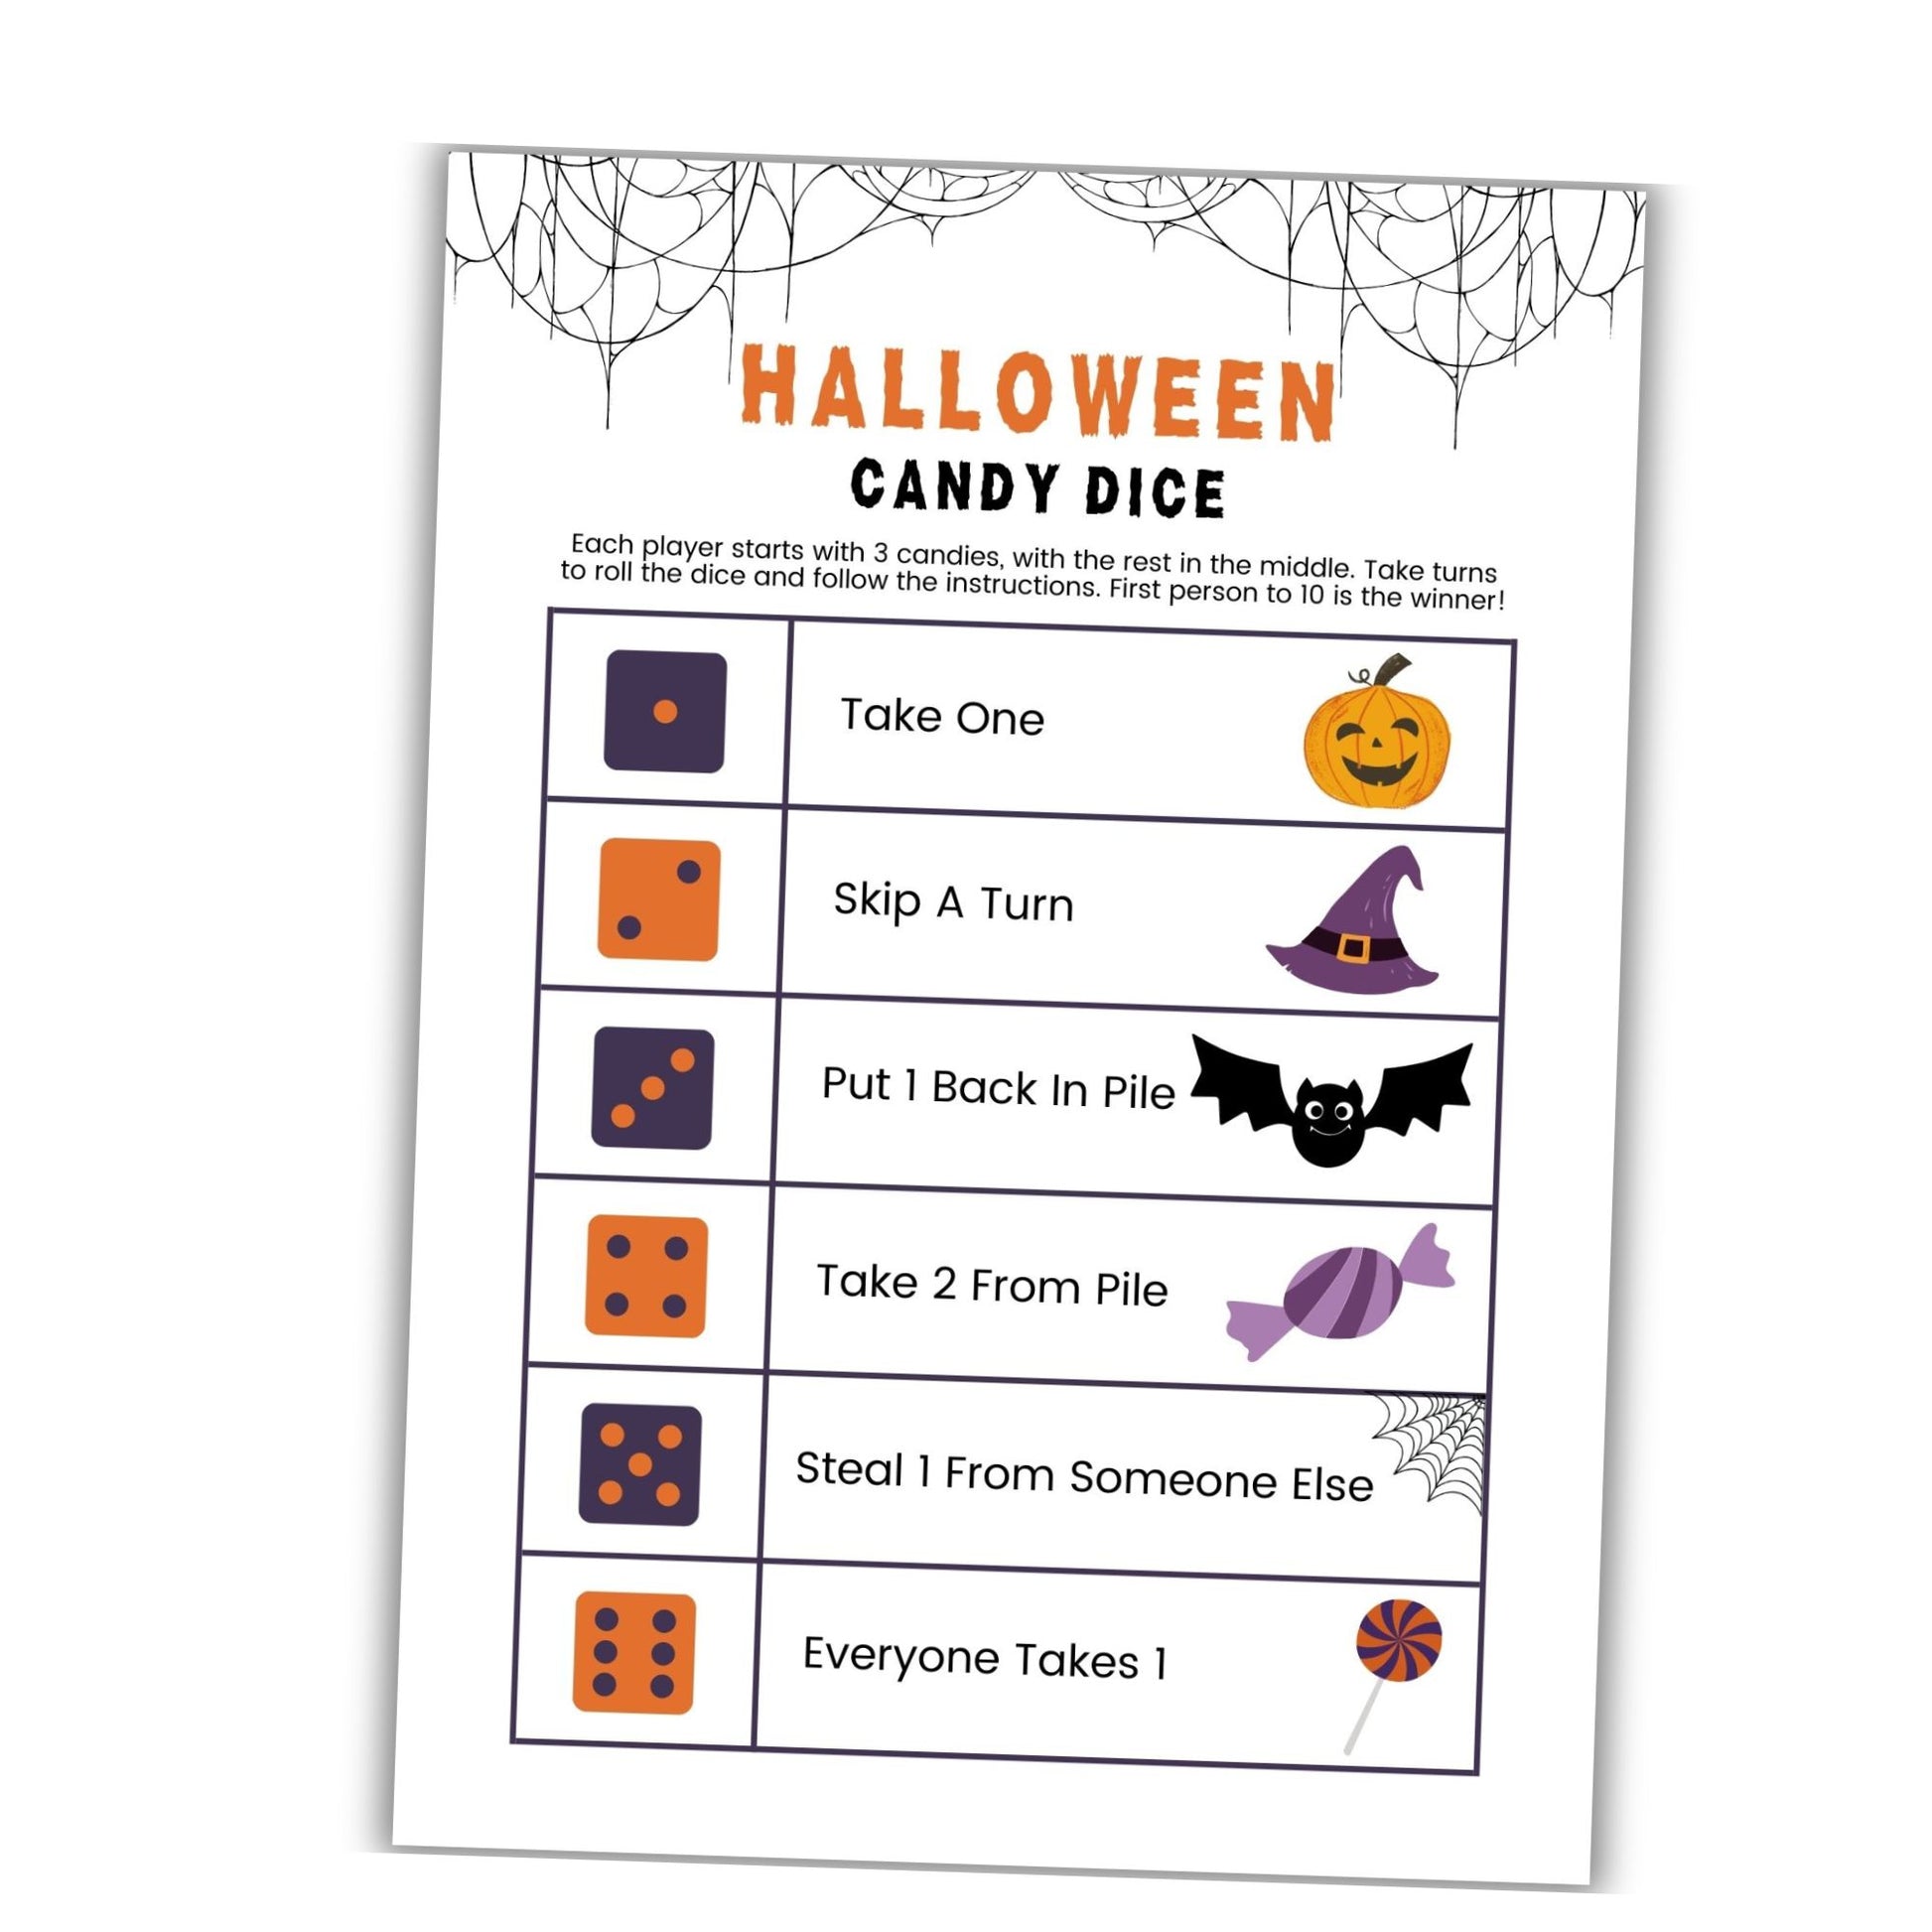 Halloween Candy Dice Game - Simplify Create Inspire